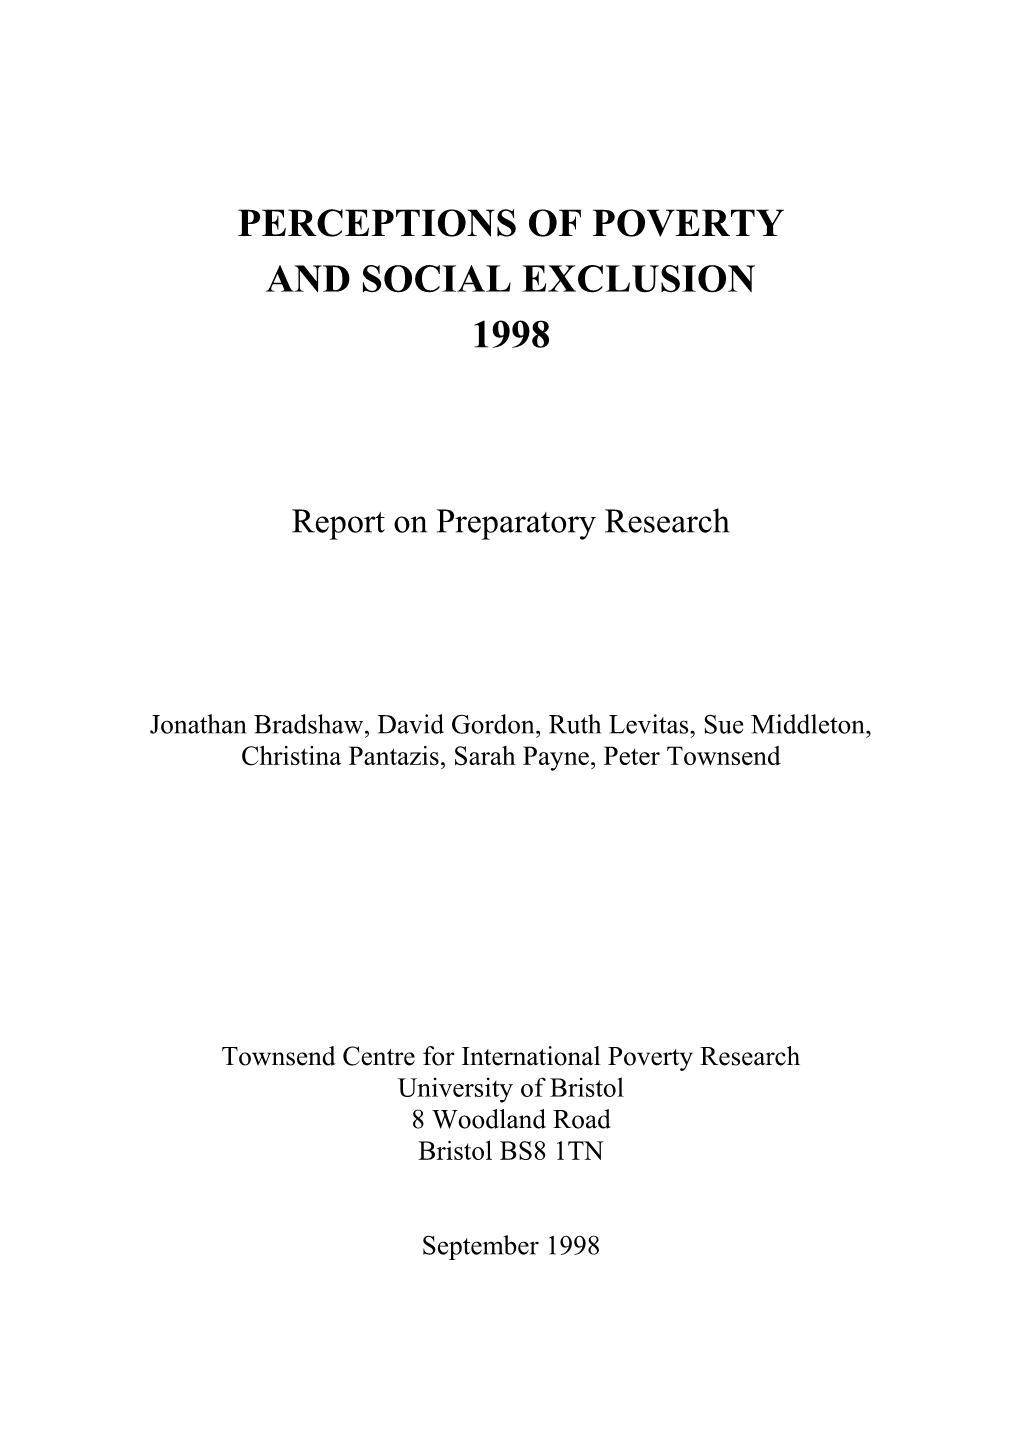 Perceptions of Poverty and Social Exclusion 1998